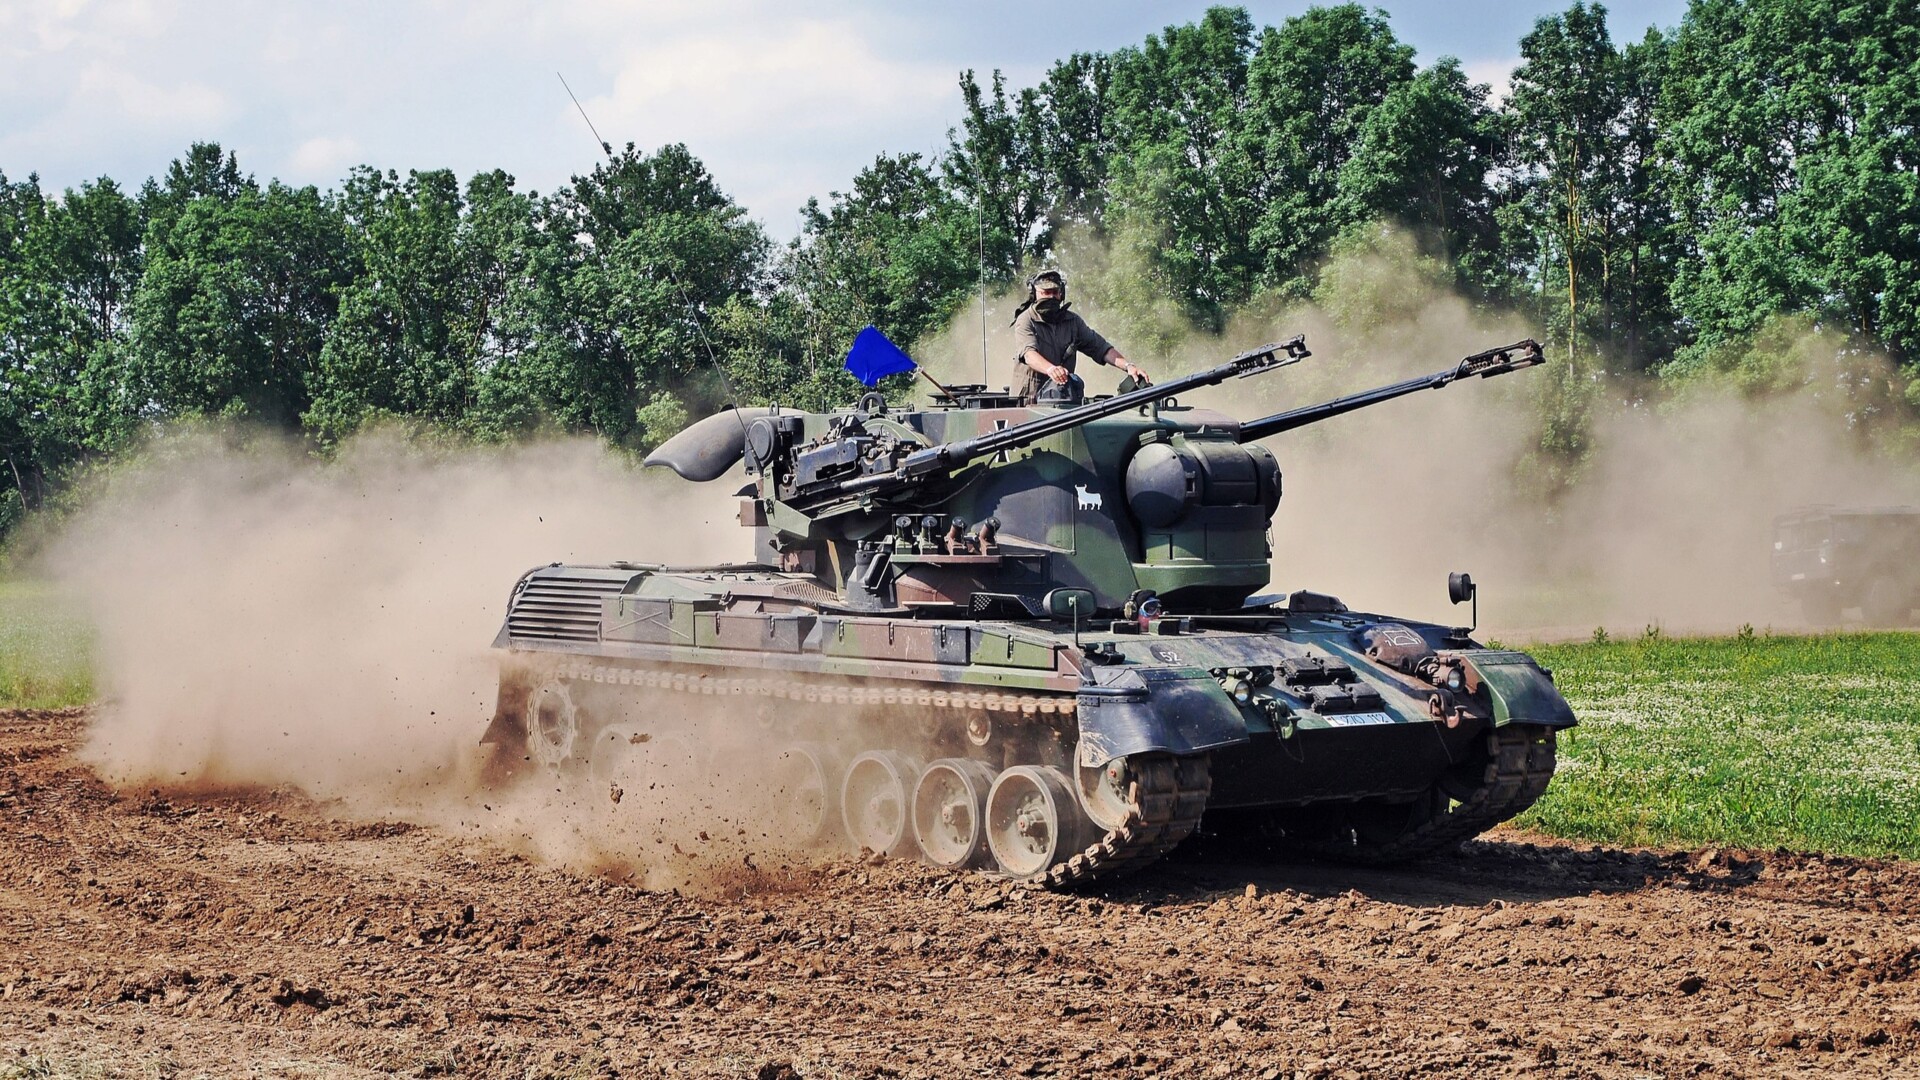 // Flugabwehrkanonenpanzer Gepard / Archivbild (cropped)  by Rainer Lippert is licensed under CC BY-SA 4.0. https://creativecommons.org/licenses/by-sa/4.0/